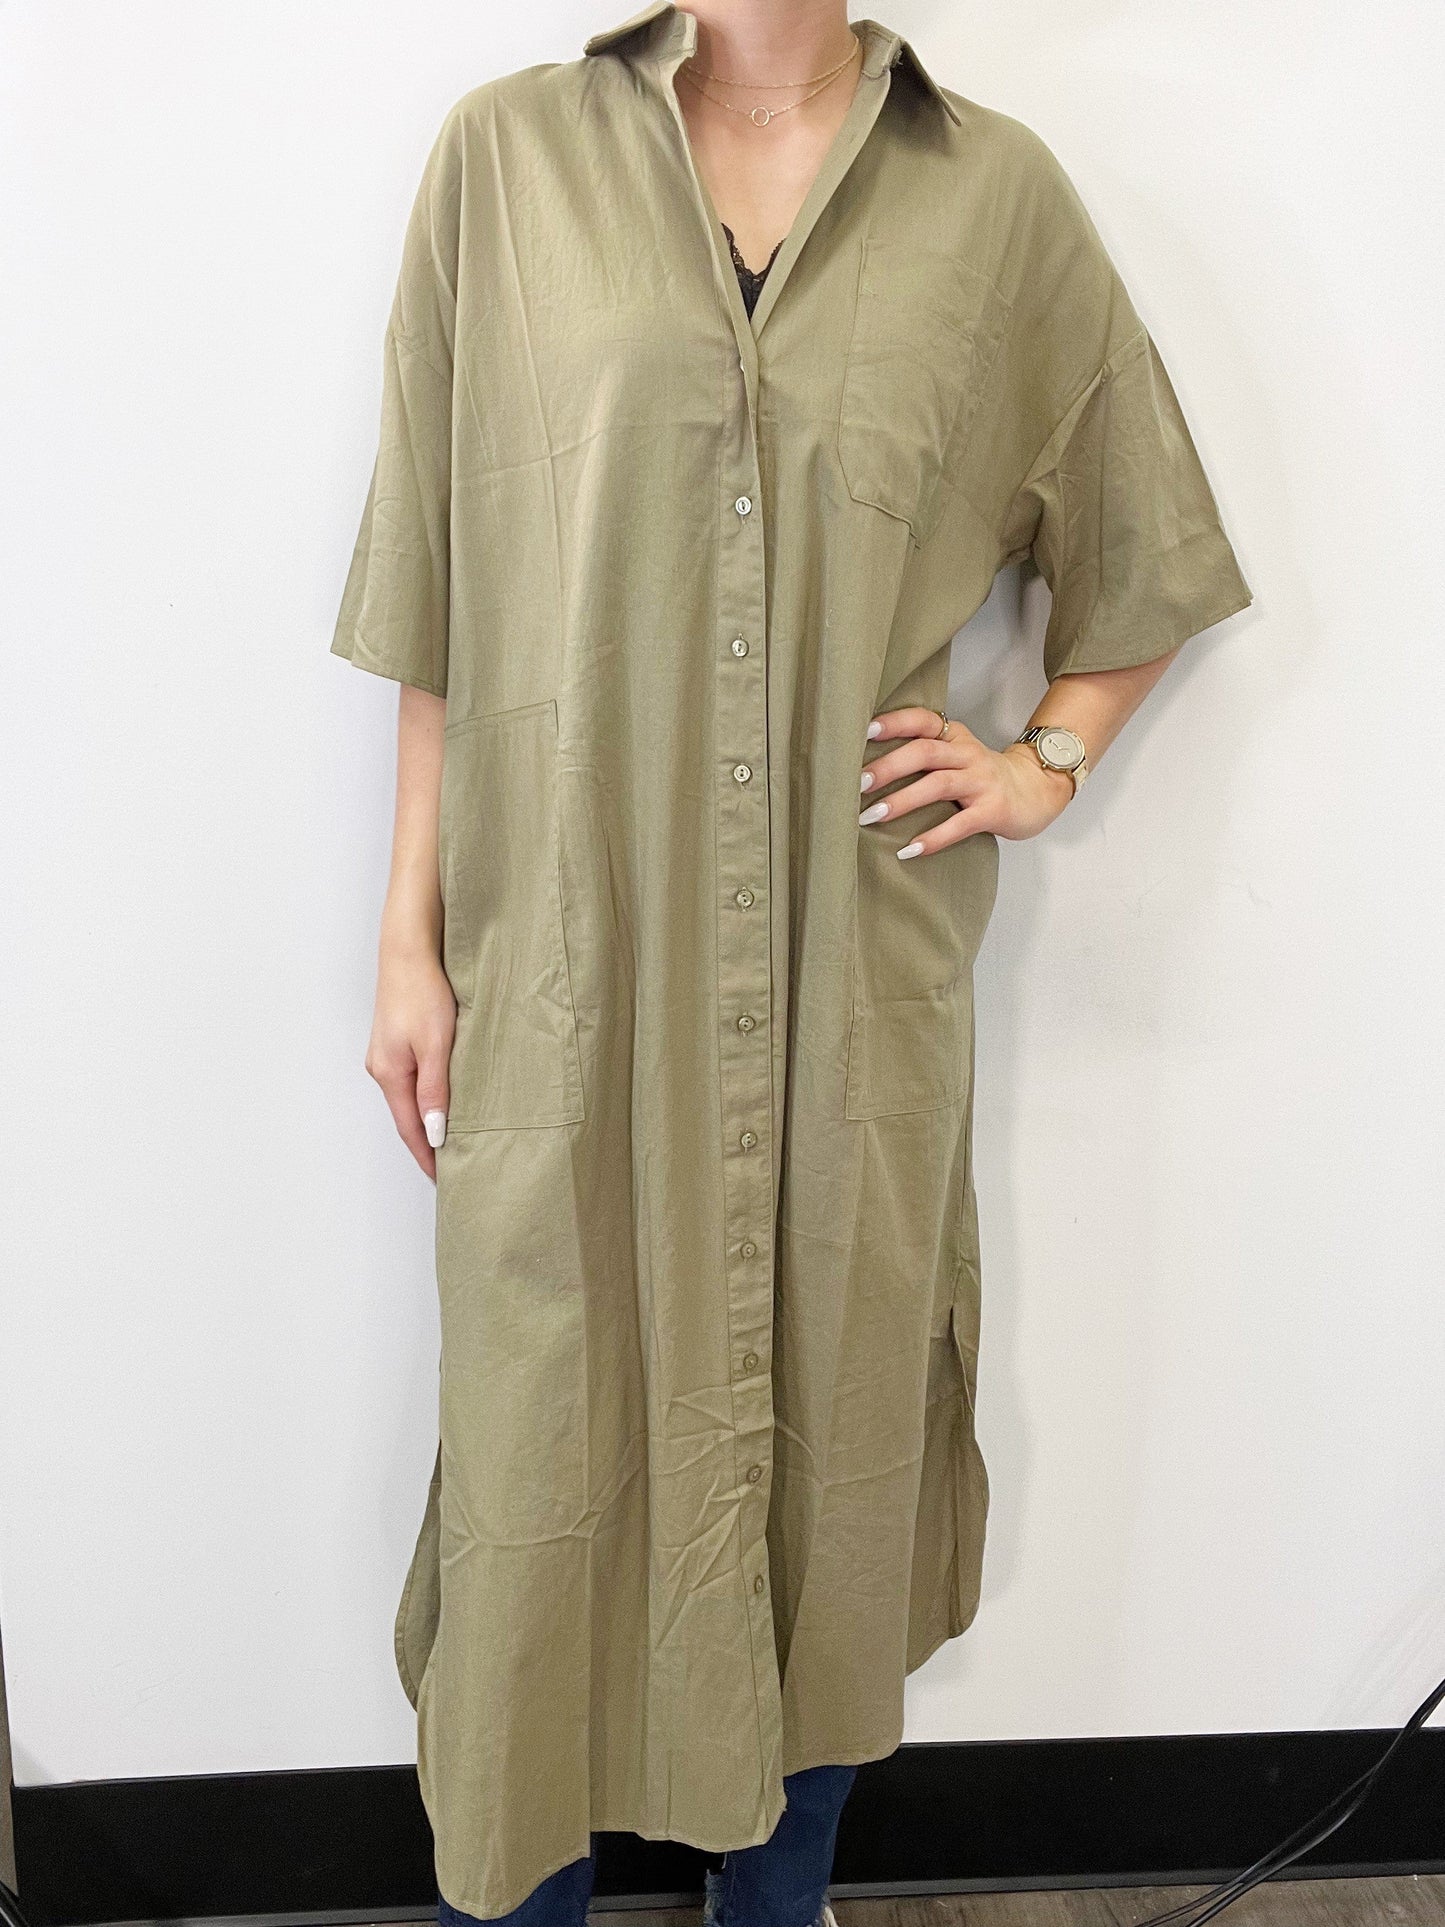 Short Sleeve Button Down Linen Top/Dress in Olive